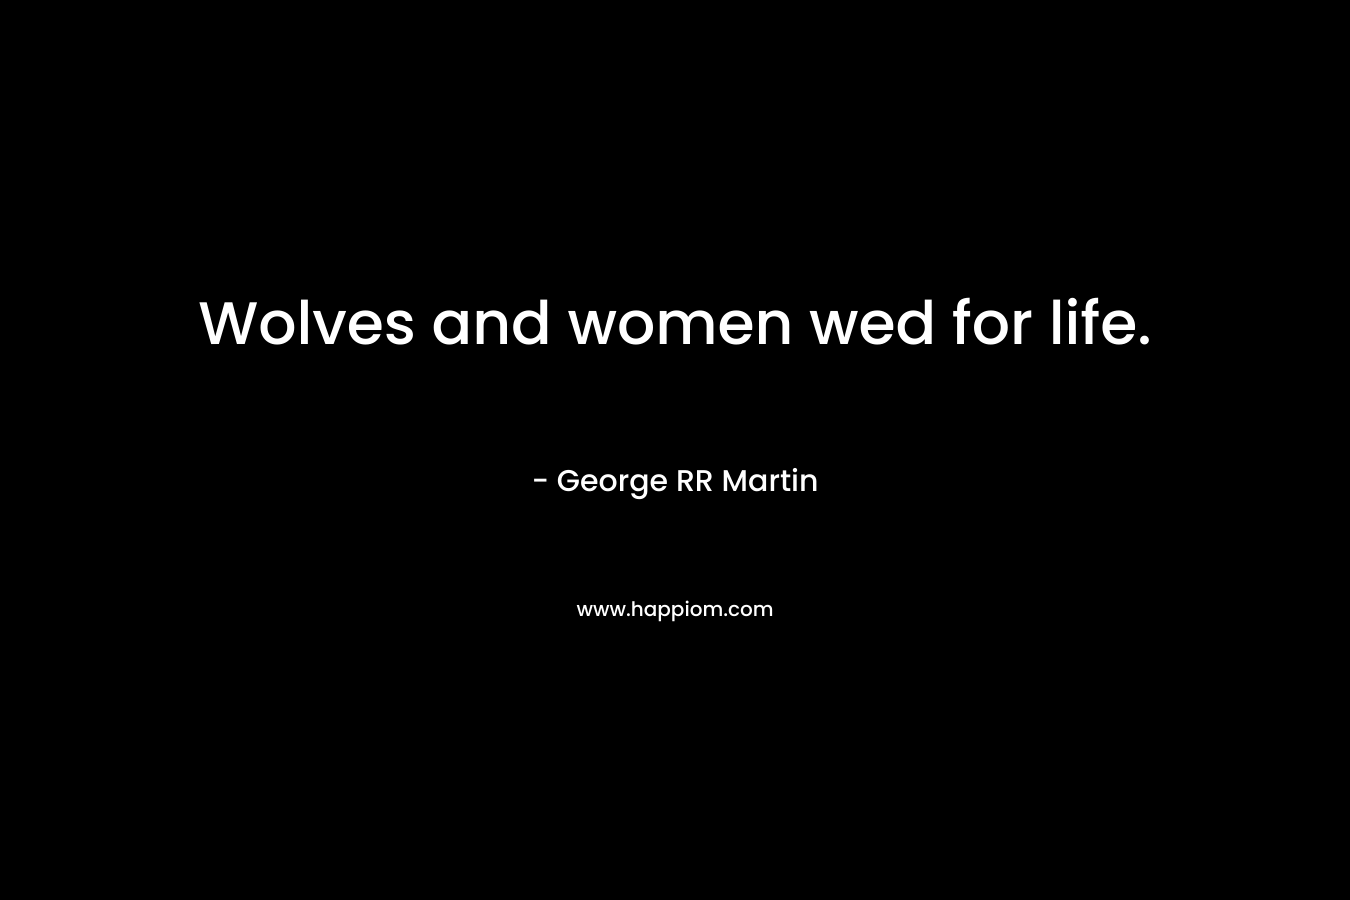 Wolves and women wed for life.